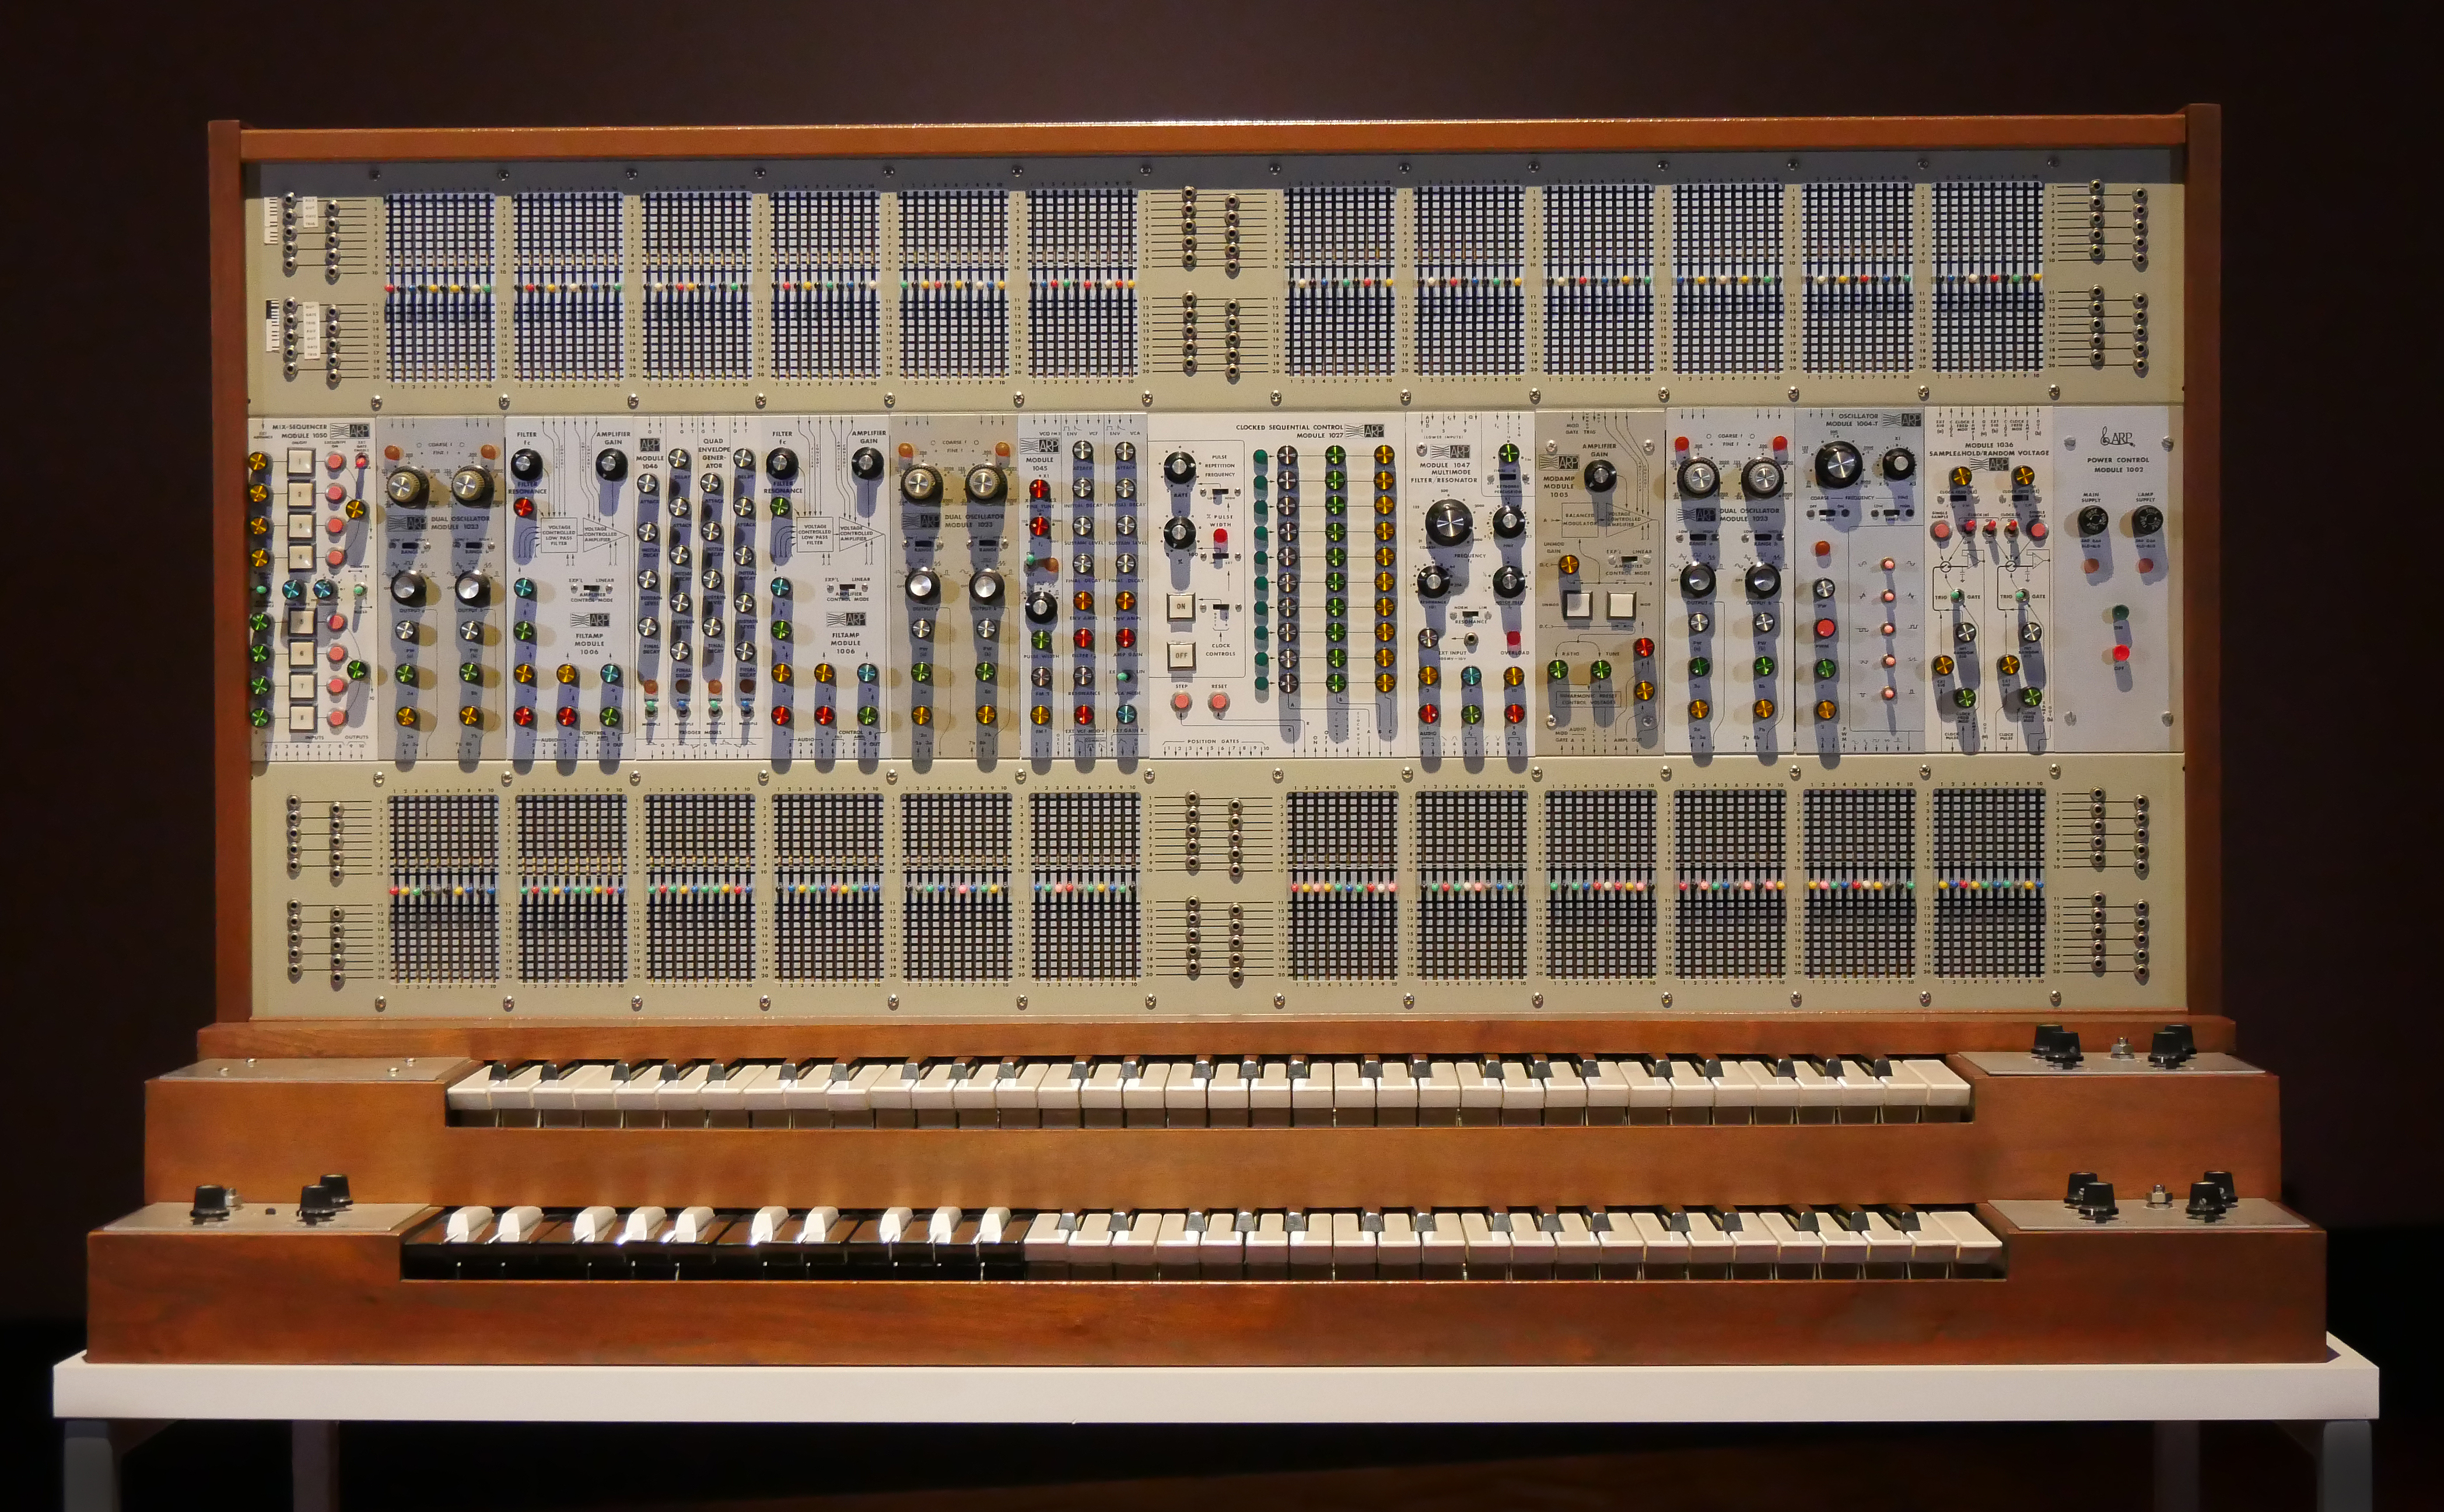 The Story of the EMEAPP ARP 2500 Modular Synthesizer